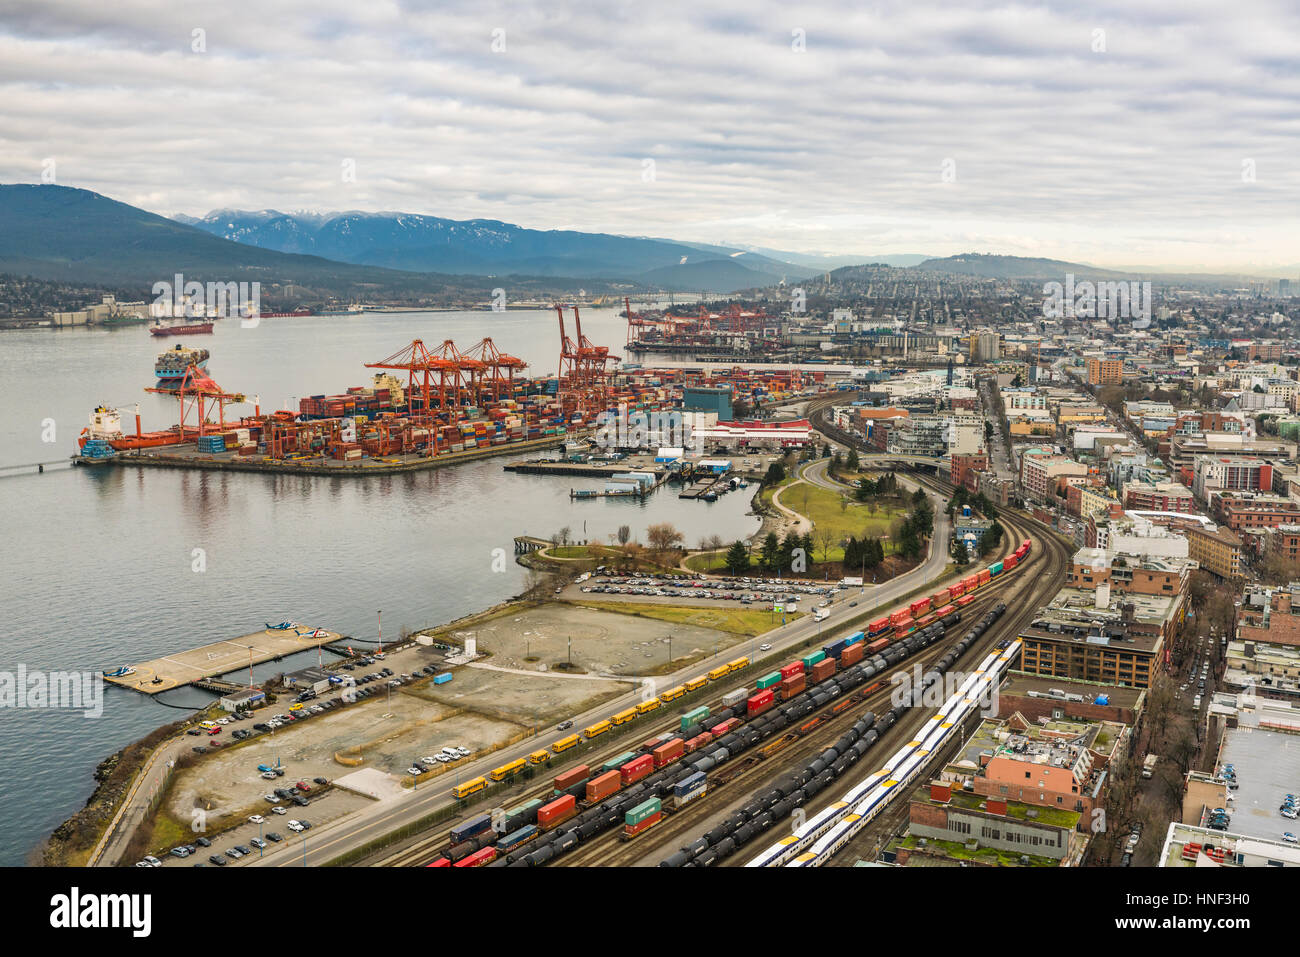 Vancouver, Canada - January 28, 2017: Vancouver Port with hundreds of shipping containers. Stock Photo